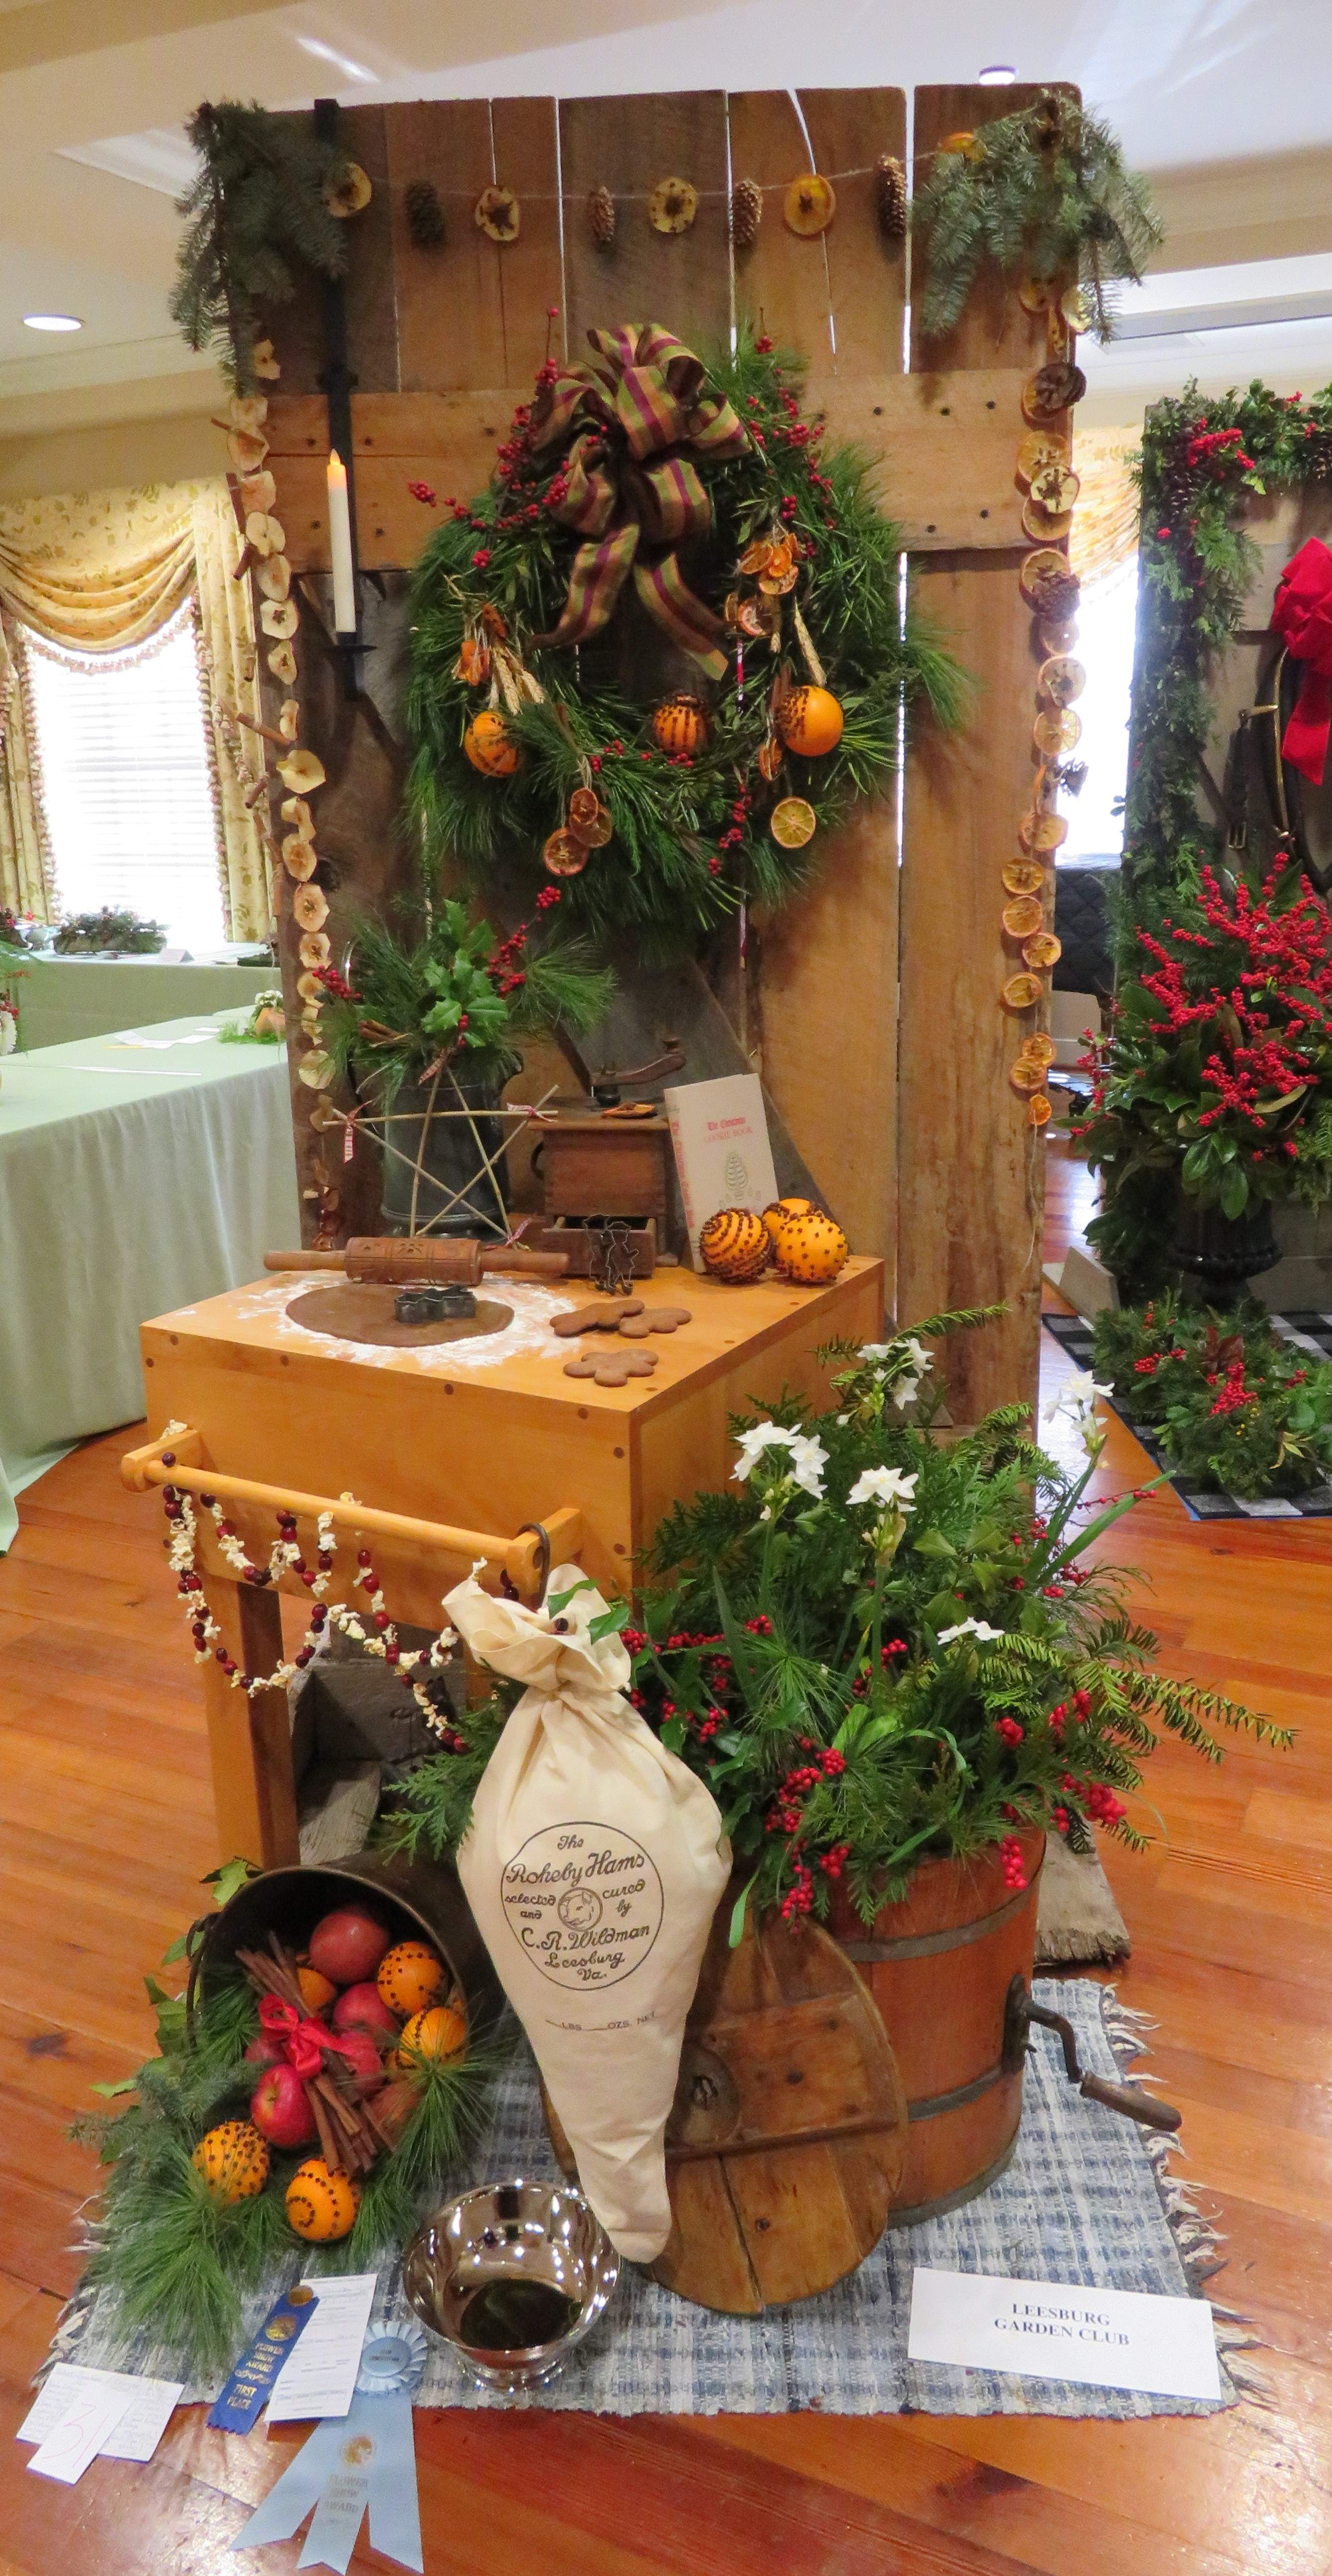 Christmas Around the World: The Middleburg Garden Club's Annual Flower Show  December 1-2, 2022